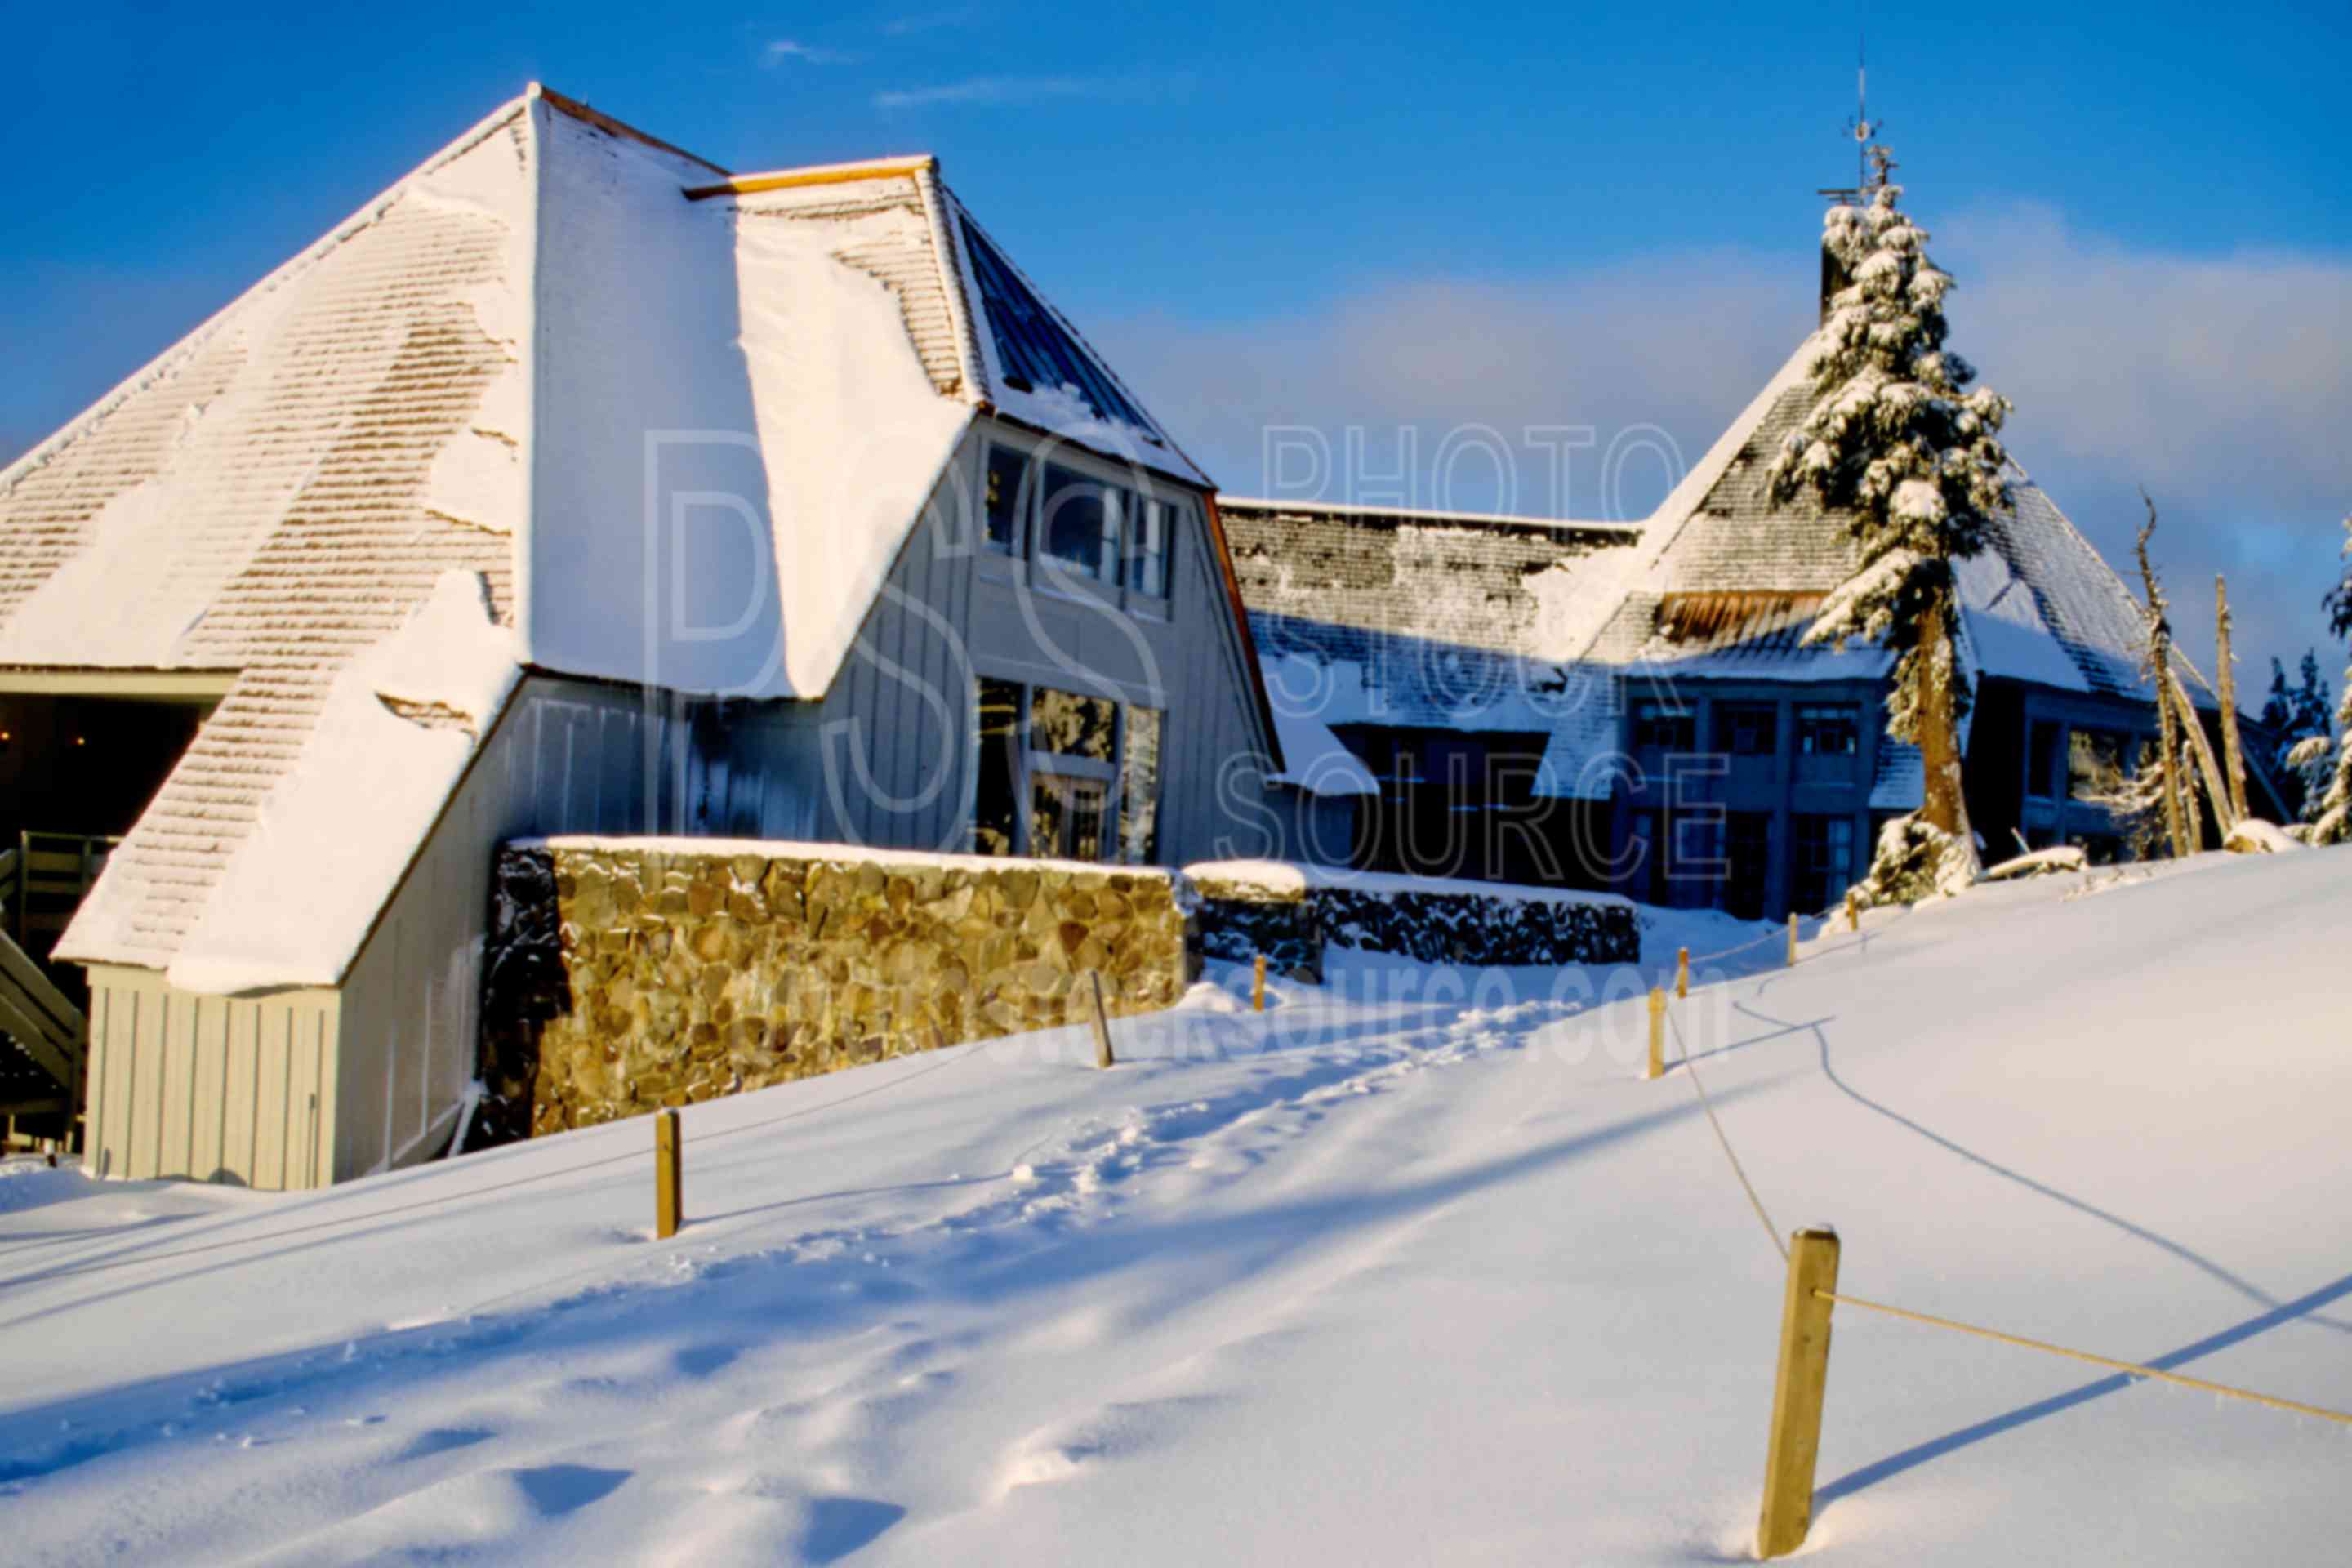 Timberline Lodge,morning,snow,mt. hood,winter,mountains